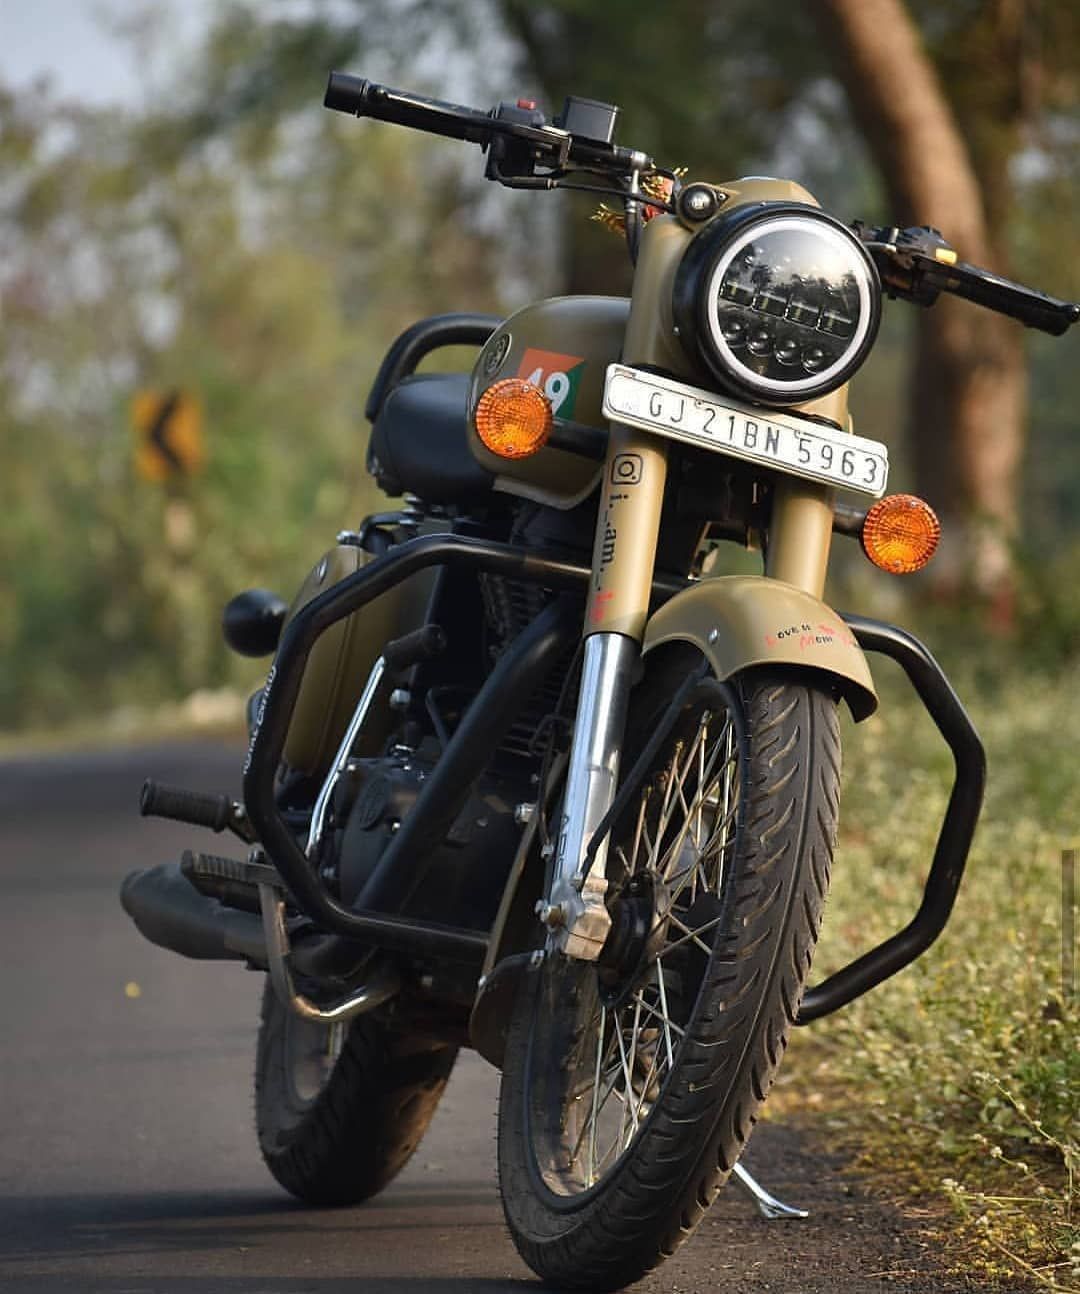 Royal Enfield Bullet Standard  IPhone Wallpapers  iPhone Wallpapers